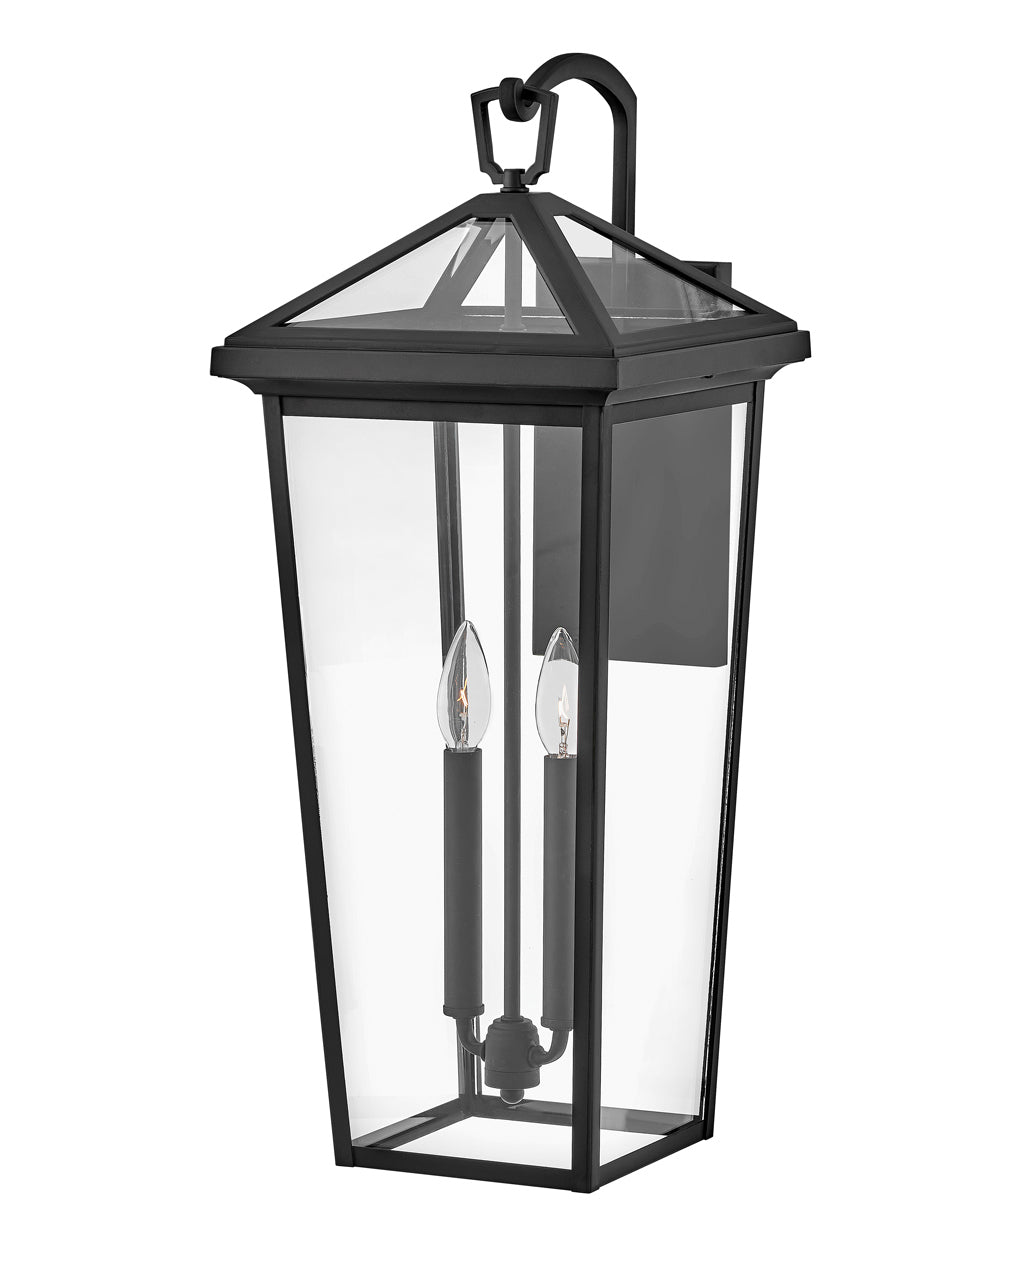 OUTDOOR ALFORD PLACE Wall Mount Lantern Outdoor l Wall Hinkley Museum Black 11.25x10.0x26.0 